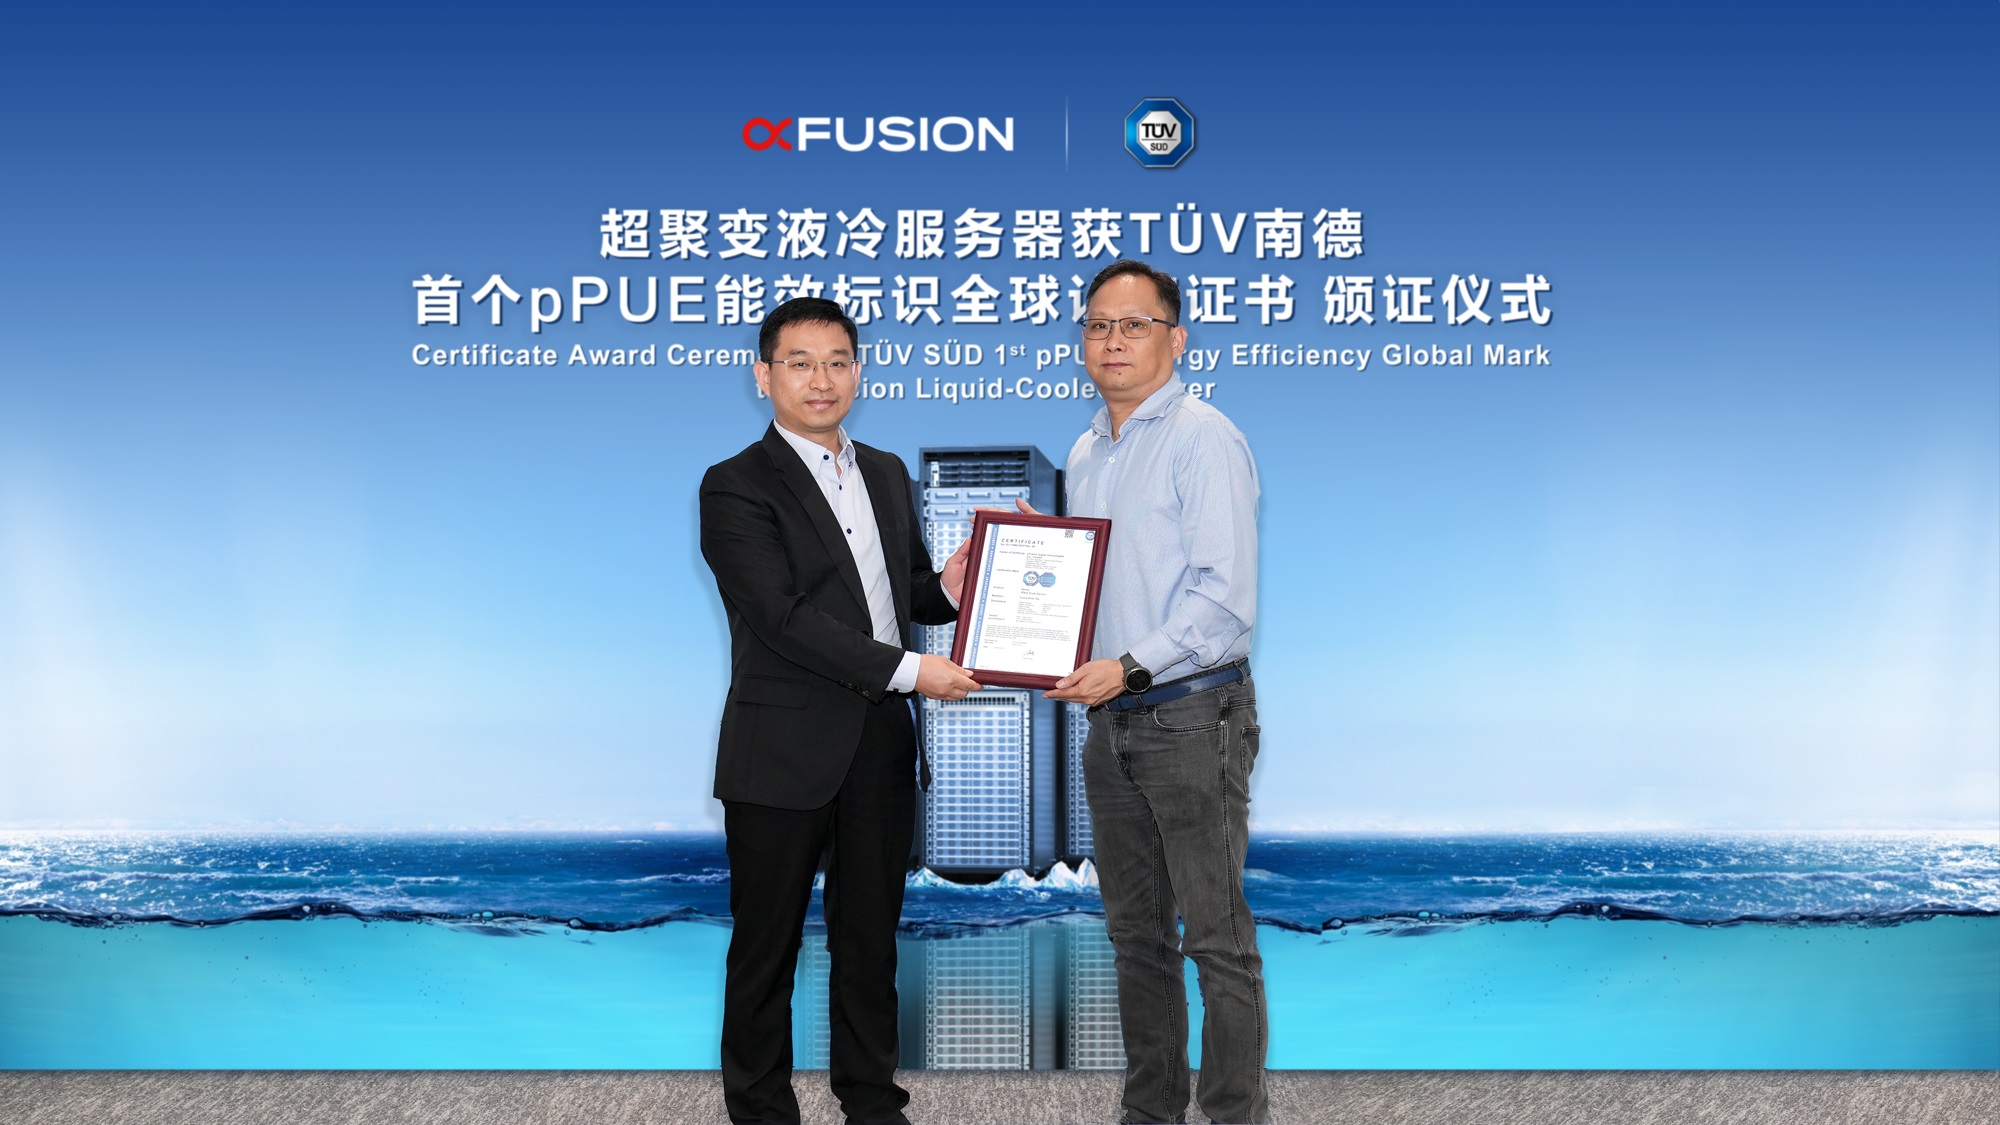 xFusion Won the First TÜV SÜD pPUE Certificate in the World